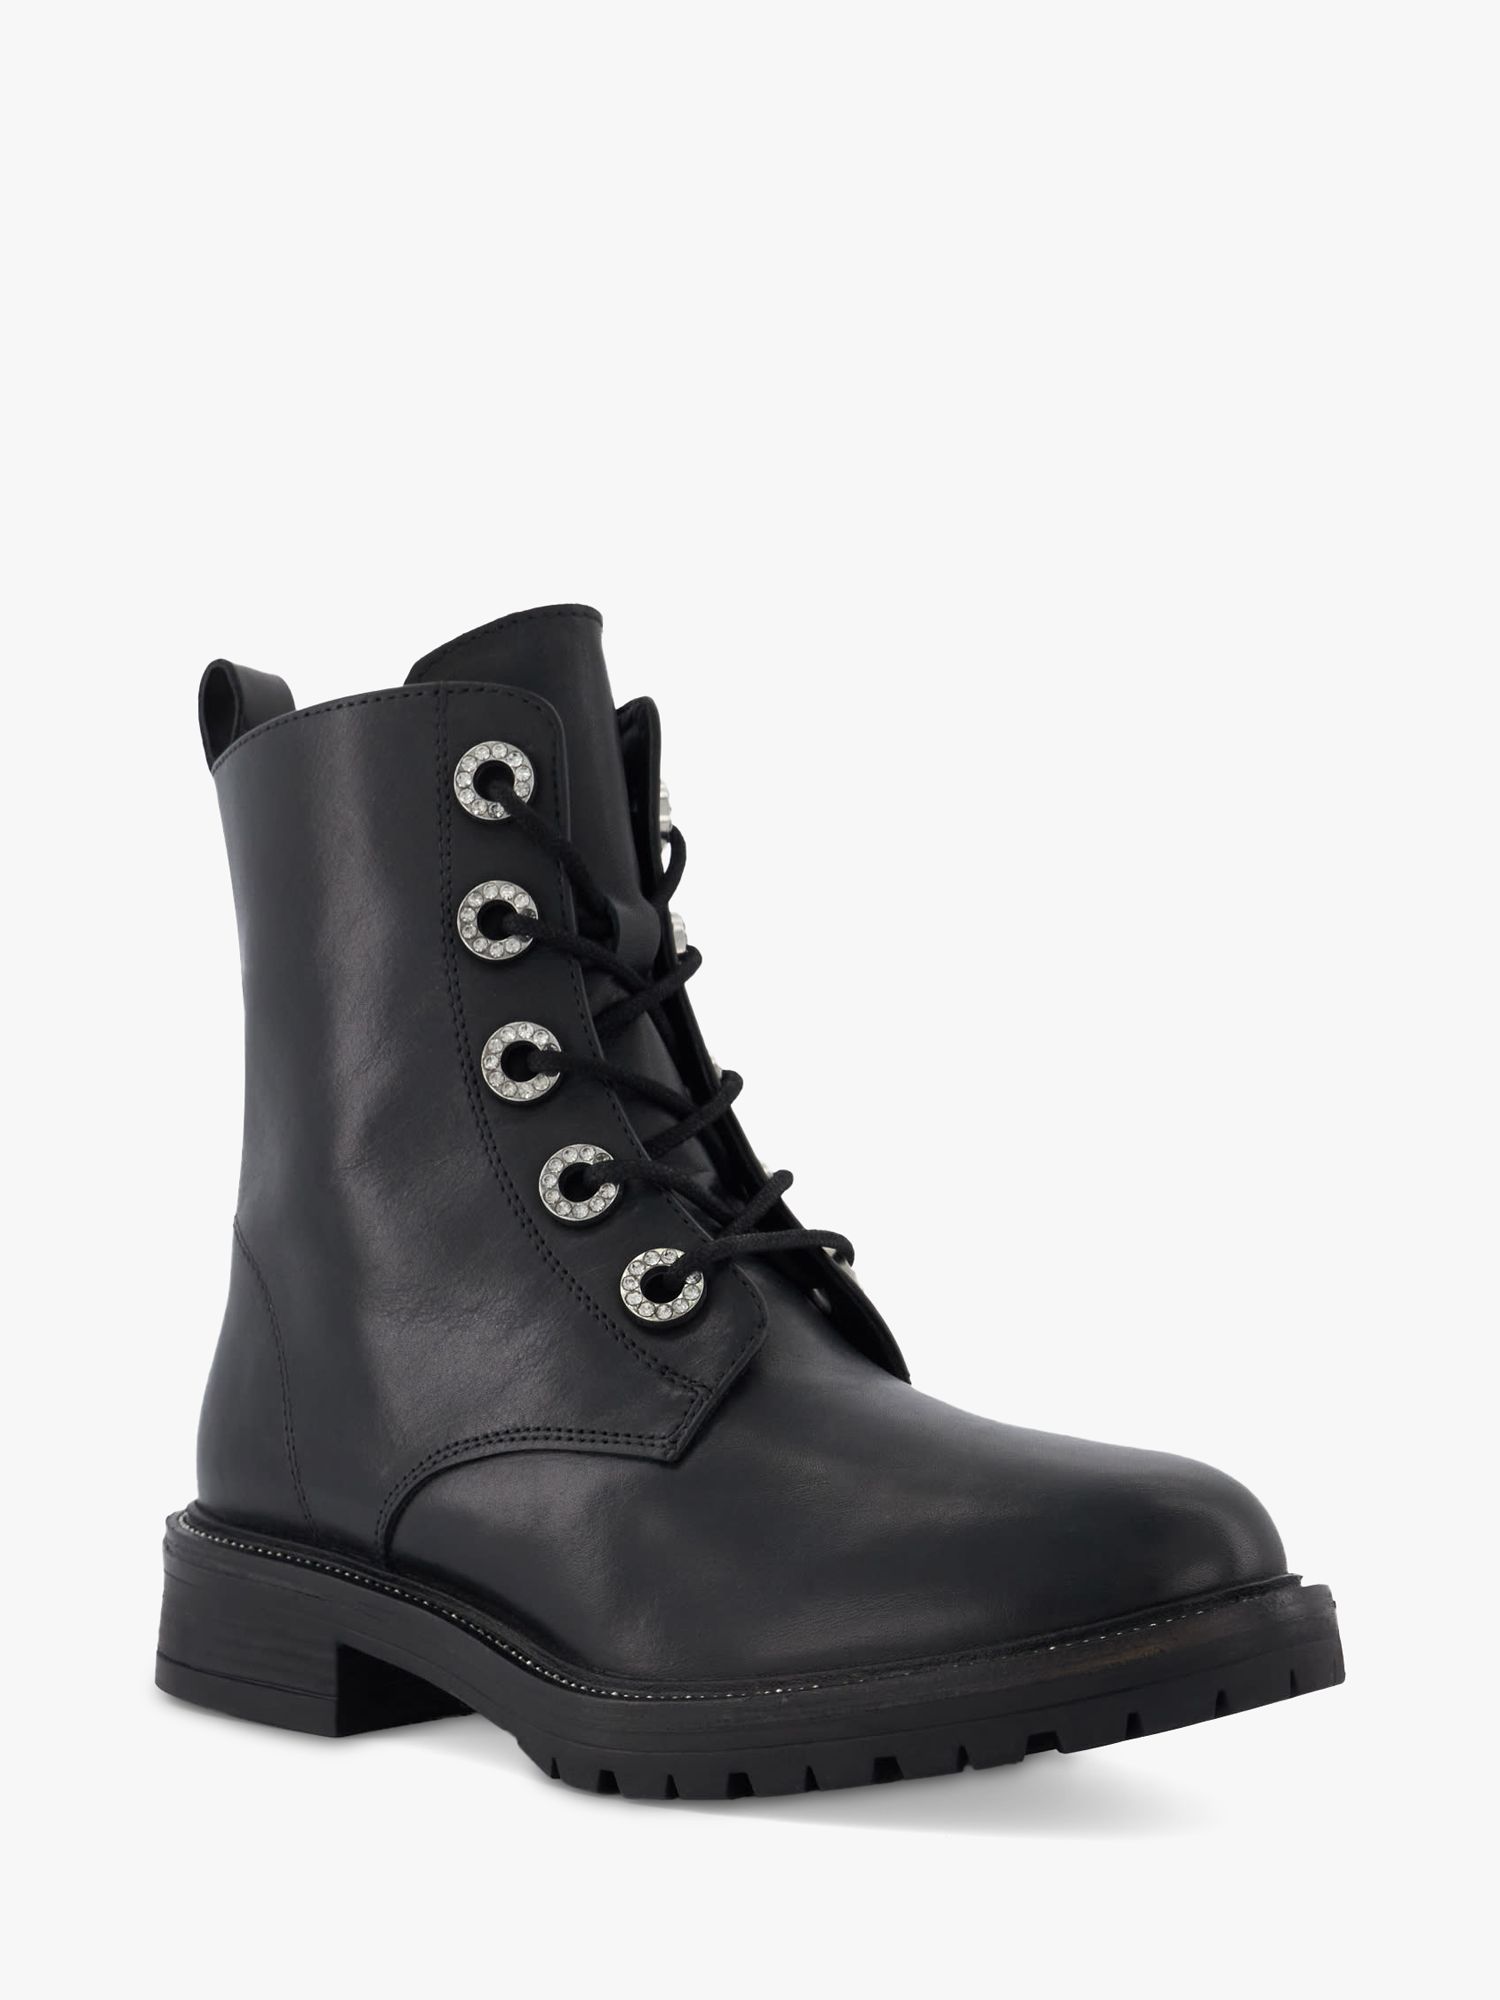 Buy Dune Precious 2 Leather Cleated Ankle Boots, Black Online at johnlewis.com